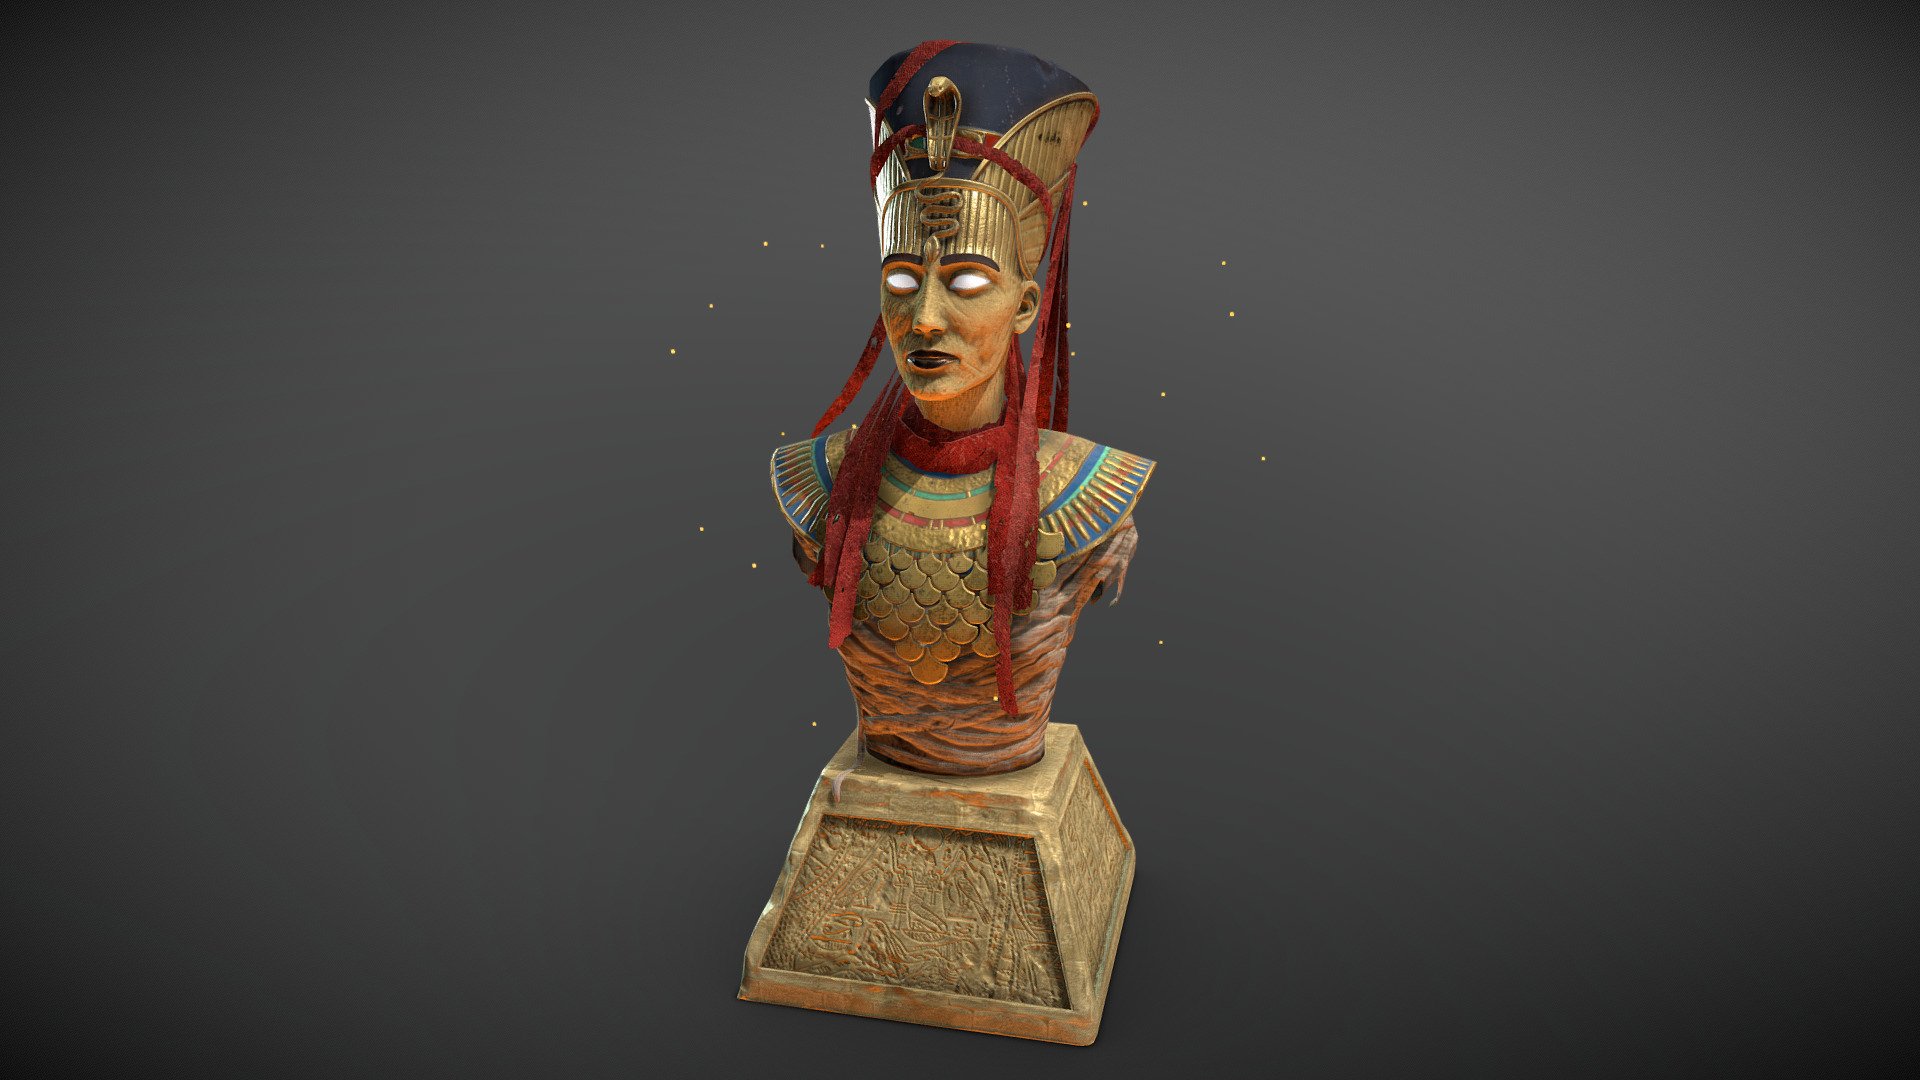 This is a bust of Nefertiti from Assassin's Creed Origins DLC &ldquo;The Curse of the Pharaohs